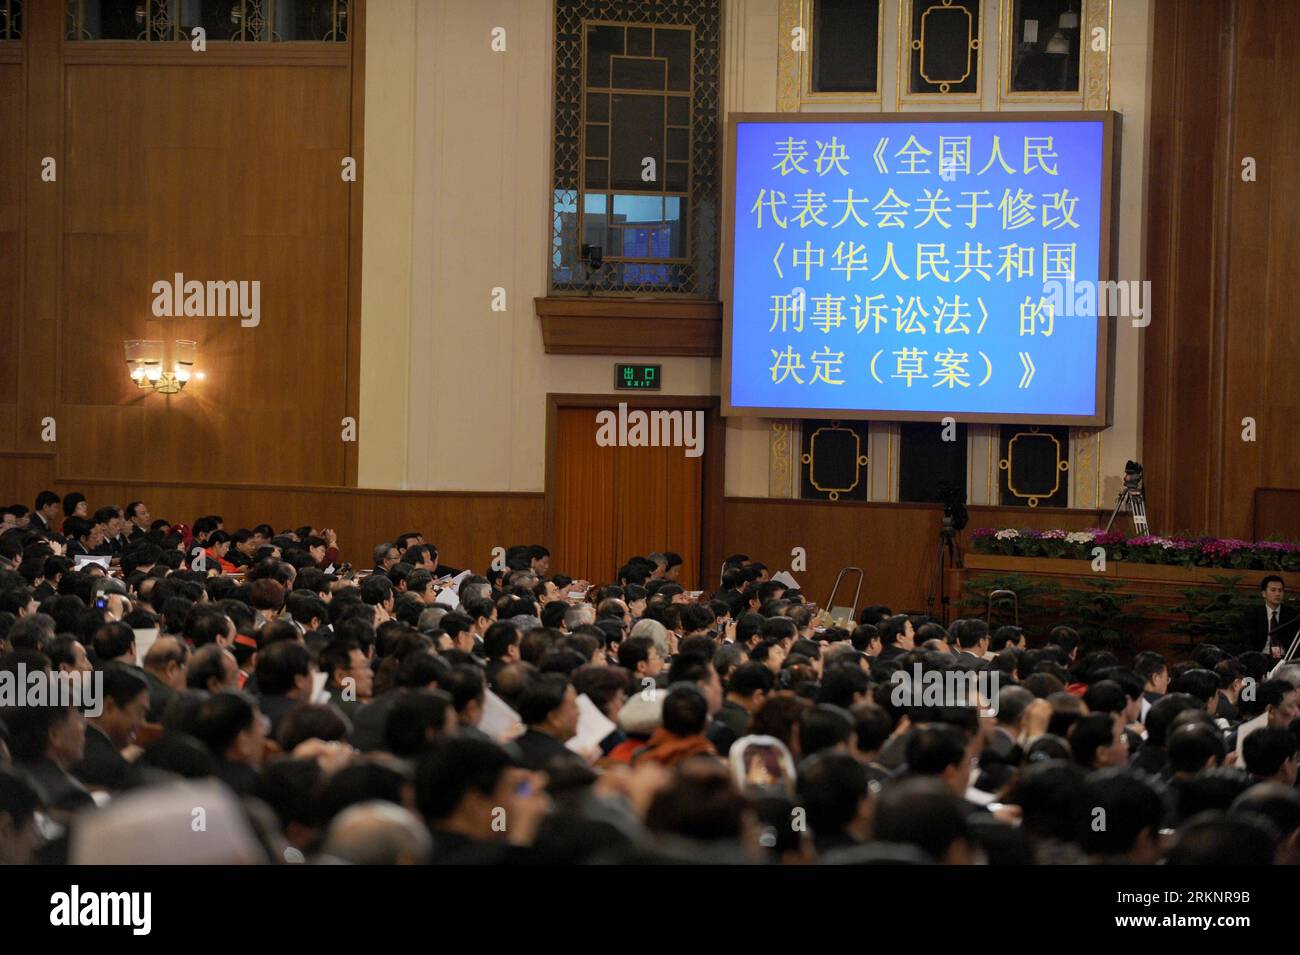 Bildnummer: 57408350  Datum: 14.03.2012  Copyright: imago/Xinhua (120314) -- BEIJING, March 14, 2012 (Xinhua) -- Deputies to the Fifth Session of the 11th National People s Congress (NPC) listen prior to voting the draft amendment to the Criminal Procedure Law during the closing meeting of the Fifth Session of the 11th NPC at the Great Hall of the in Beijing, capital of China, March 14, 2012. (Xinhua/Wang Jianhua) (llp) (TWO SESSIONS)CHINA-BEIJING-NPC-CLOSING MEETING (CN) PUBLICATIONxNOTxINxCHN Politik Nationaler Volkskongress xbs x0x 2012 quer      57408350 Date 14 03 2012 Copyright Imago XIN Stock Photo